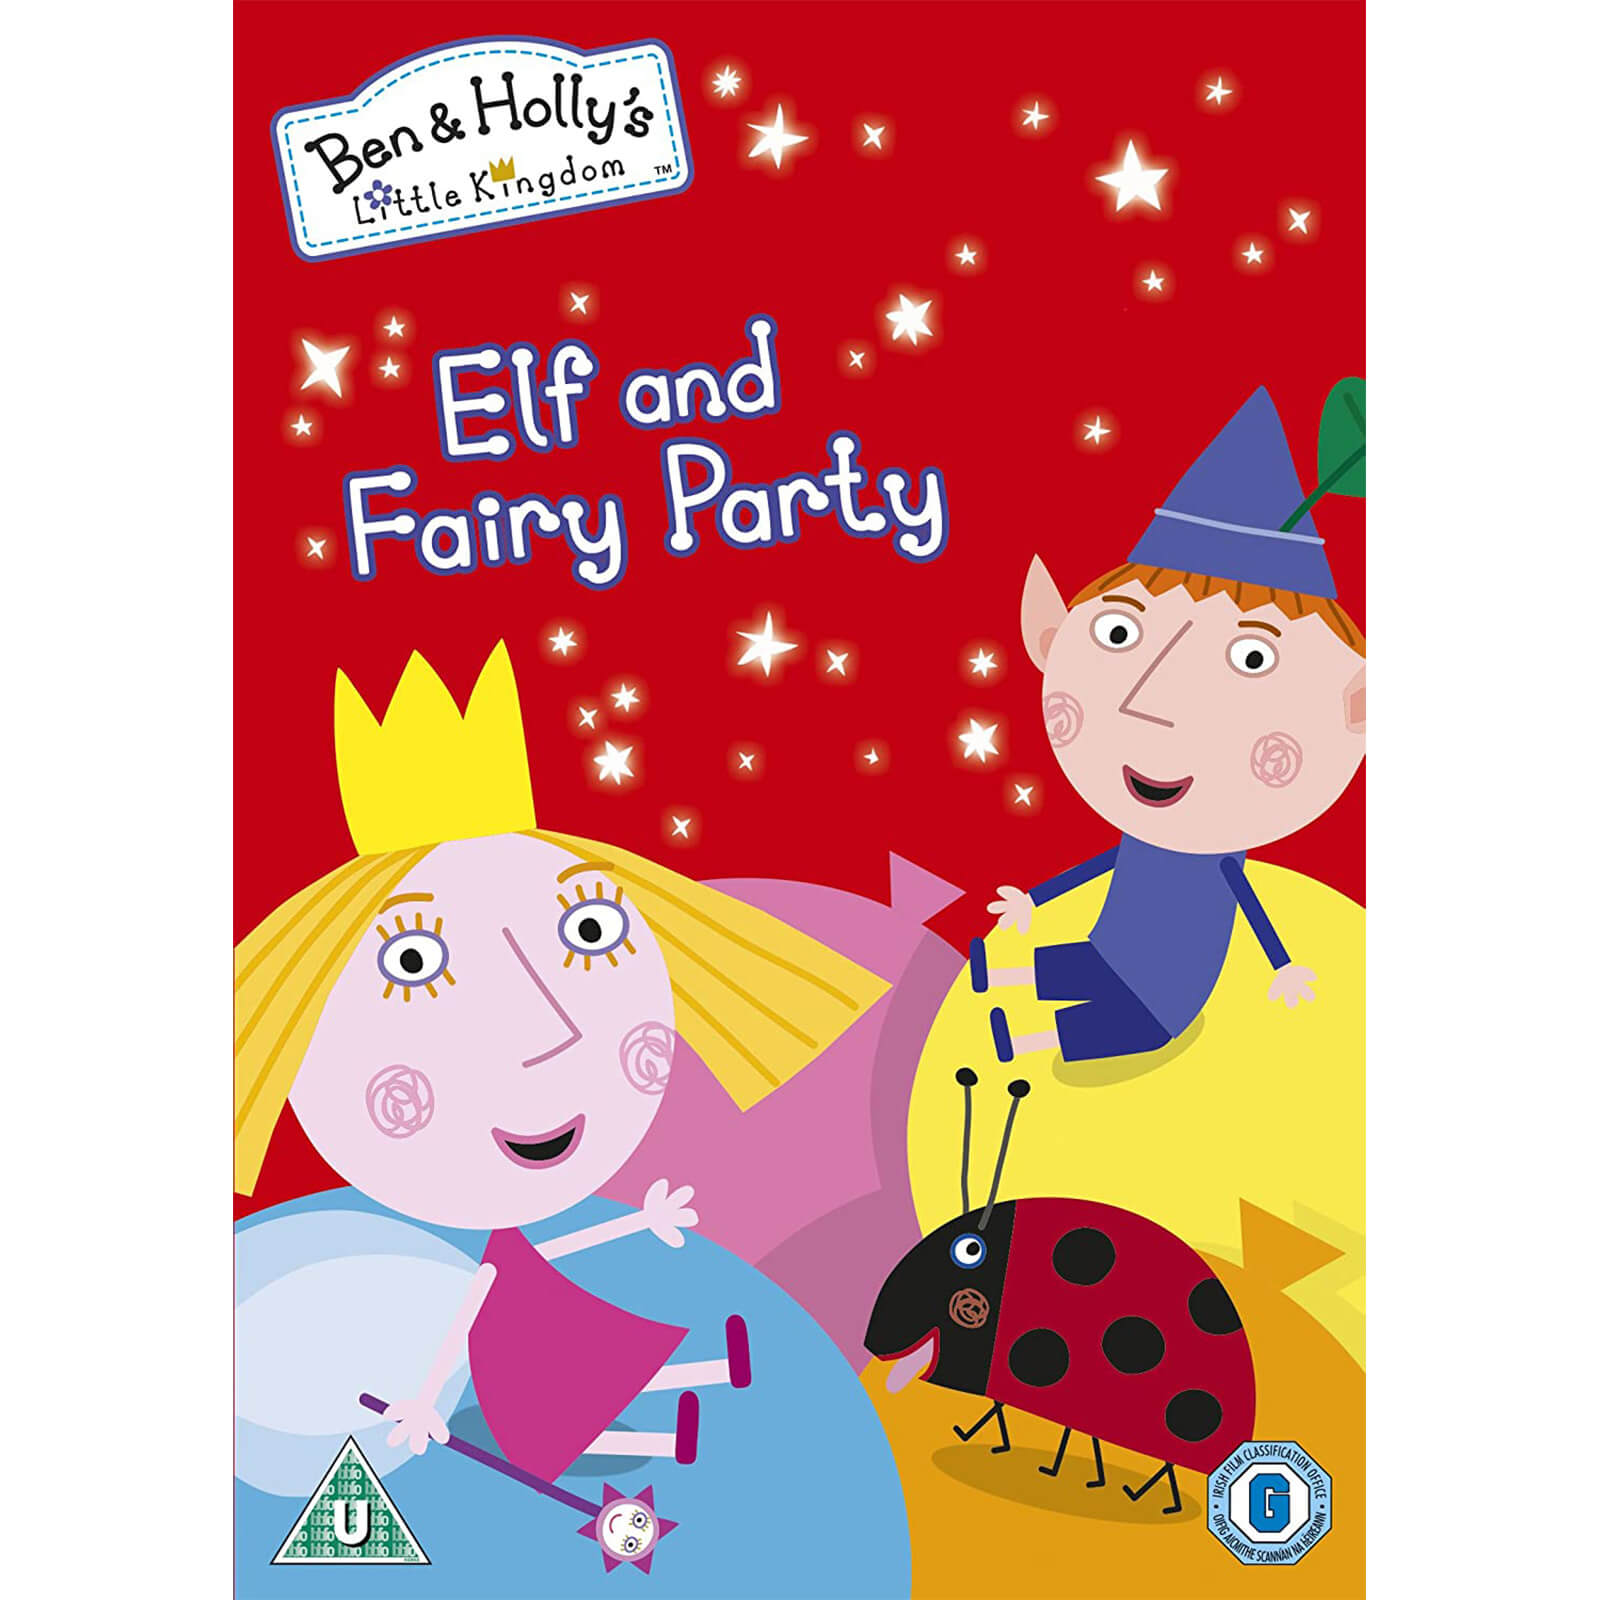 Holly s little kingdom. Ben and Holly s little Kingdom. Принцесса Холли и Бен. Эльф Бен и принцесса Холли. Ben and Holly's little Kingdom Ben Elf.